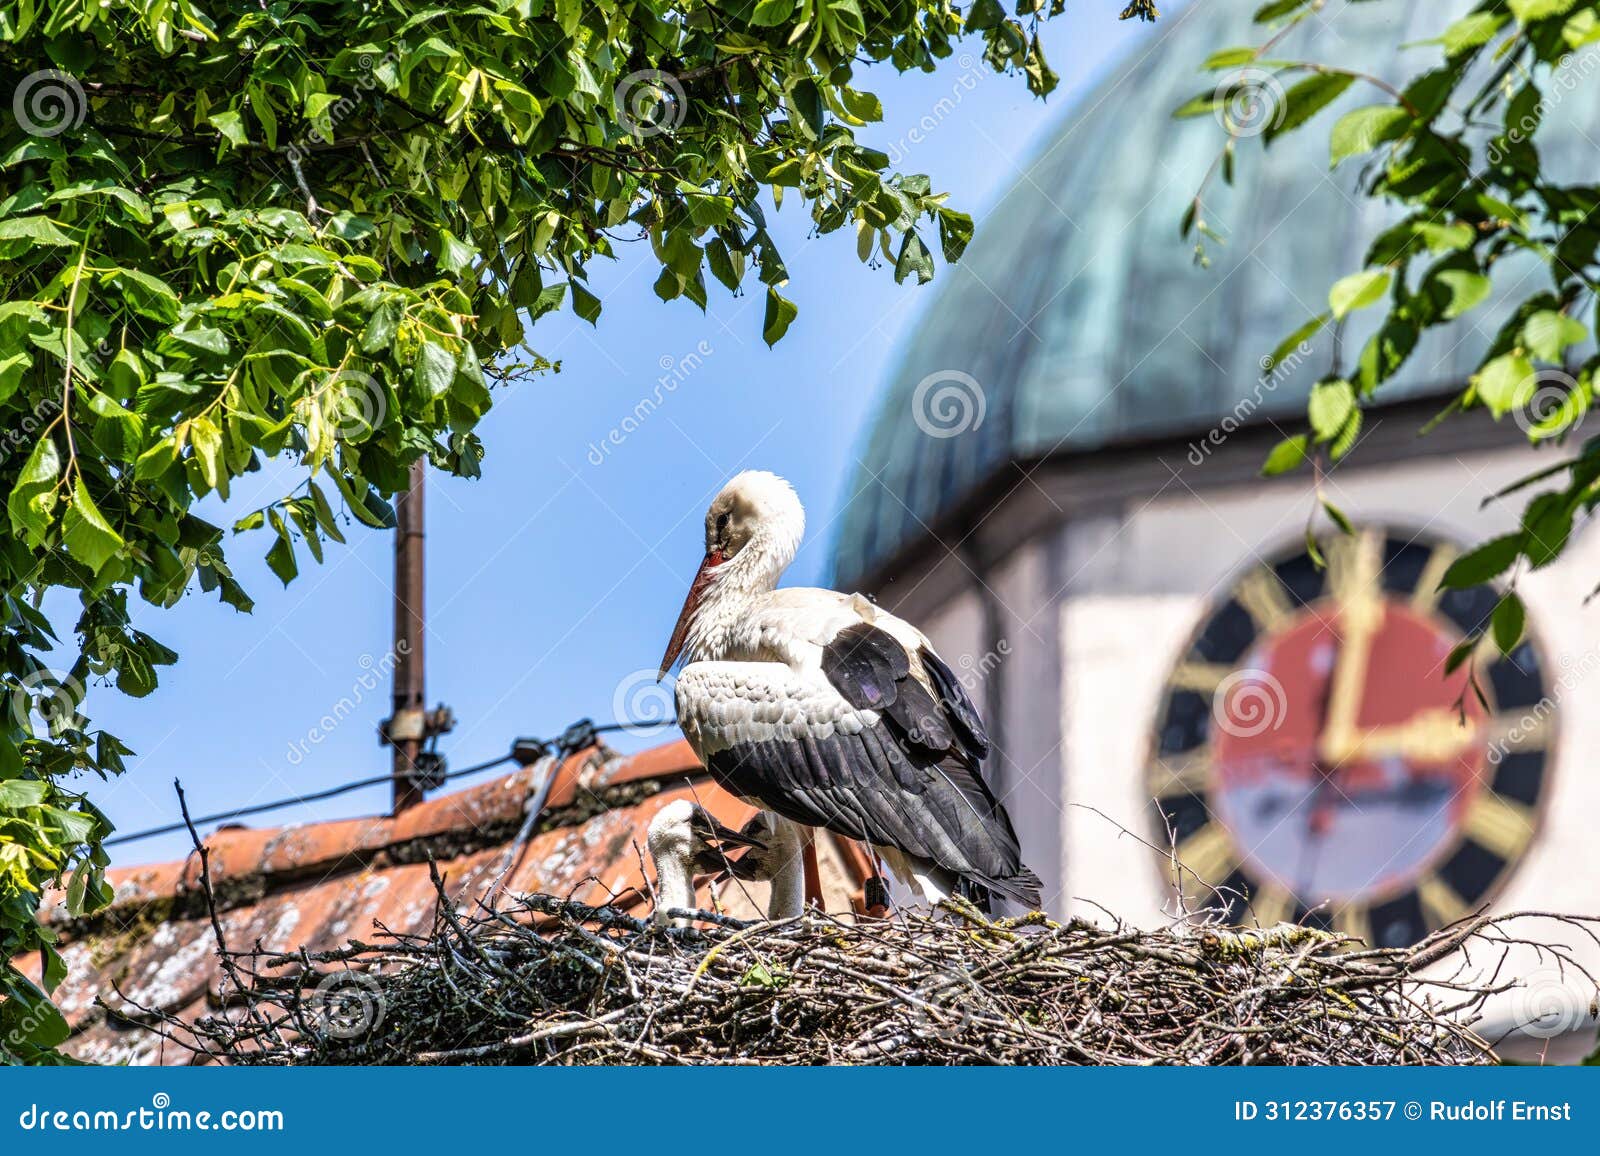 european white stork, ciconia ciconia with small babies on the nest in oettingen, swabia, bavaria, germany, europe